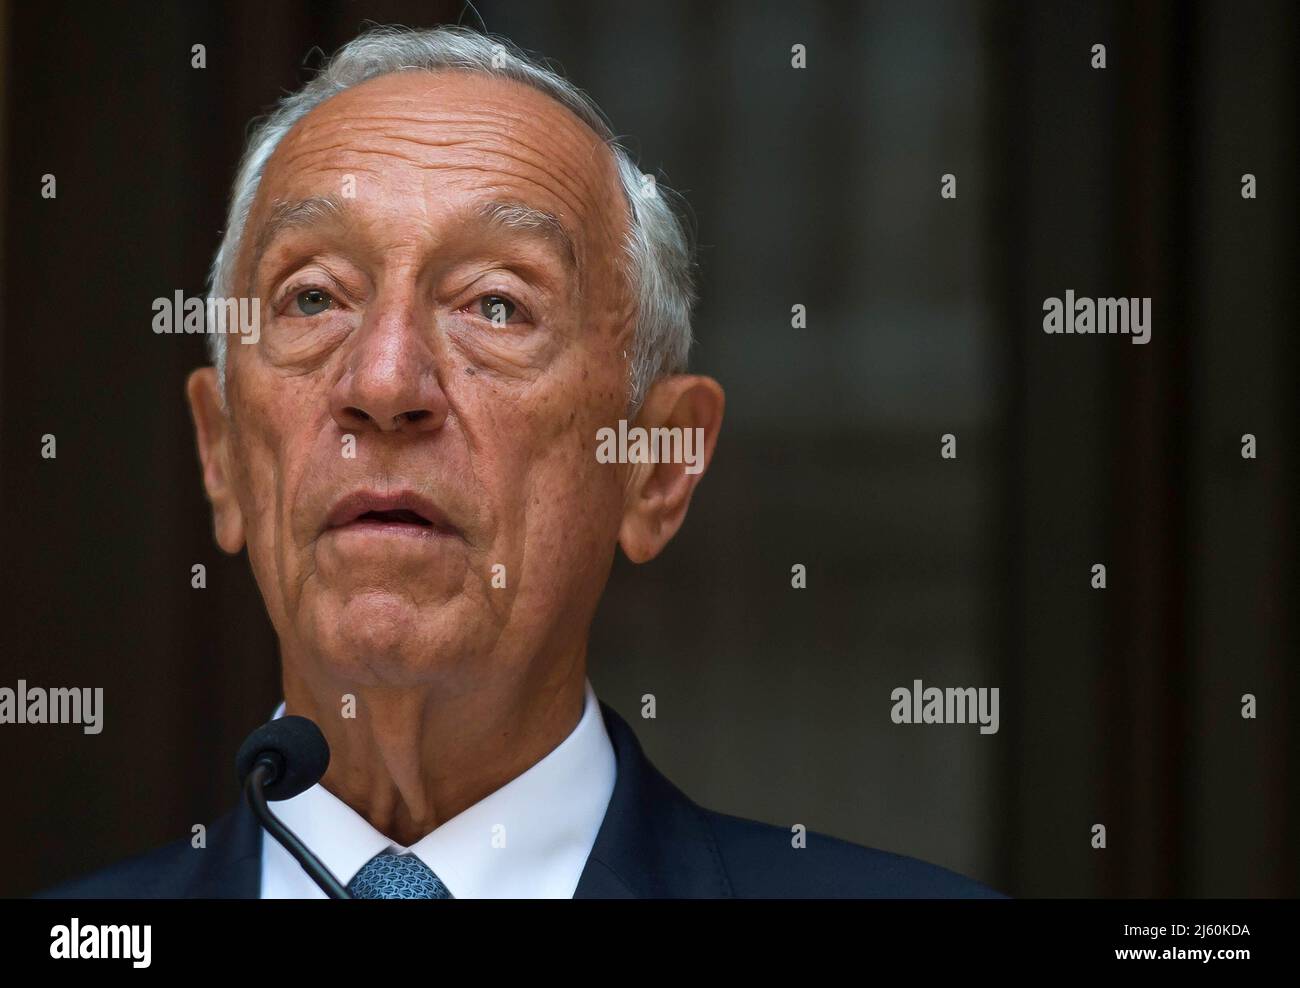 Malaga, Spain. 26th Apr, 2022. Portuguese President, Marcelo Rebelo de Sousa gives a speech during the opening of the exhibition of Portuguese painter and illustrator Paula Rego, at Picasso Museum. The exhibition 'Paula Rego', shows her view on figurative art and the representation of women with more than 80 works. The showing will run at Picasso Museum from 27 April to 21 August. Credit: SOPA Images Limited/Alamy Live News Stock Photo